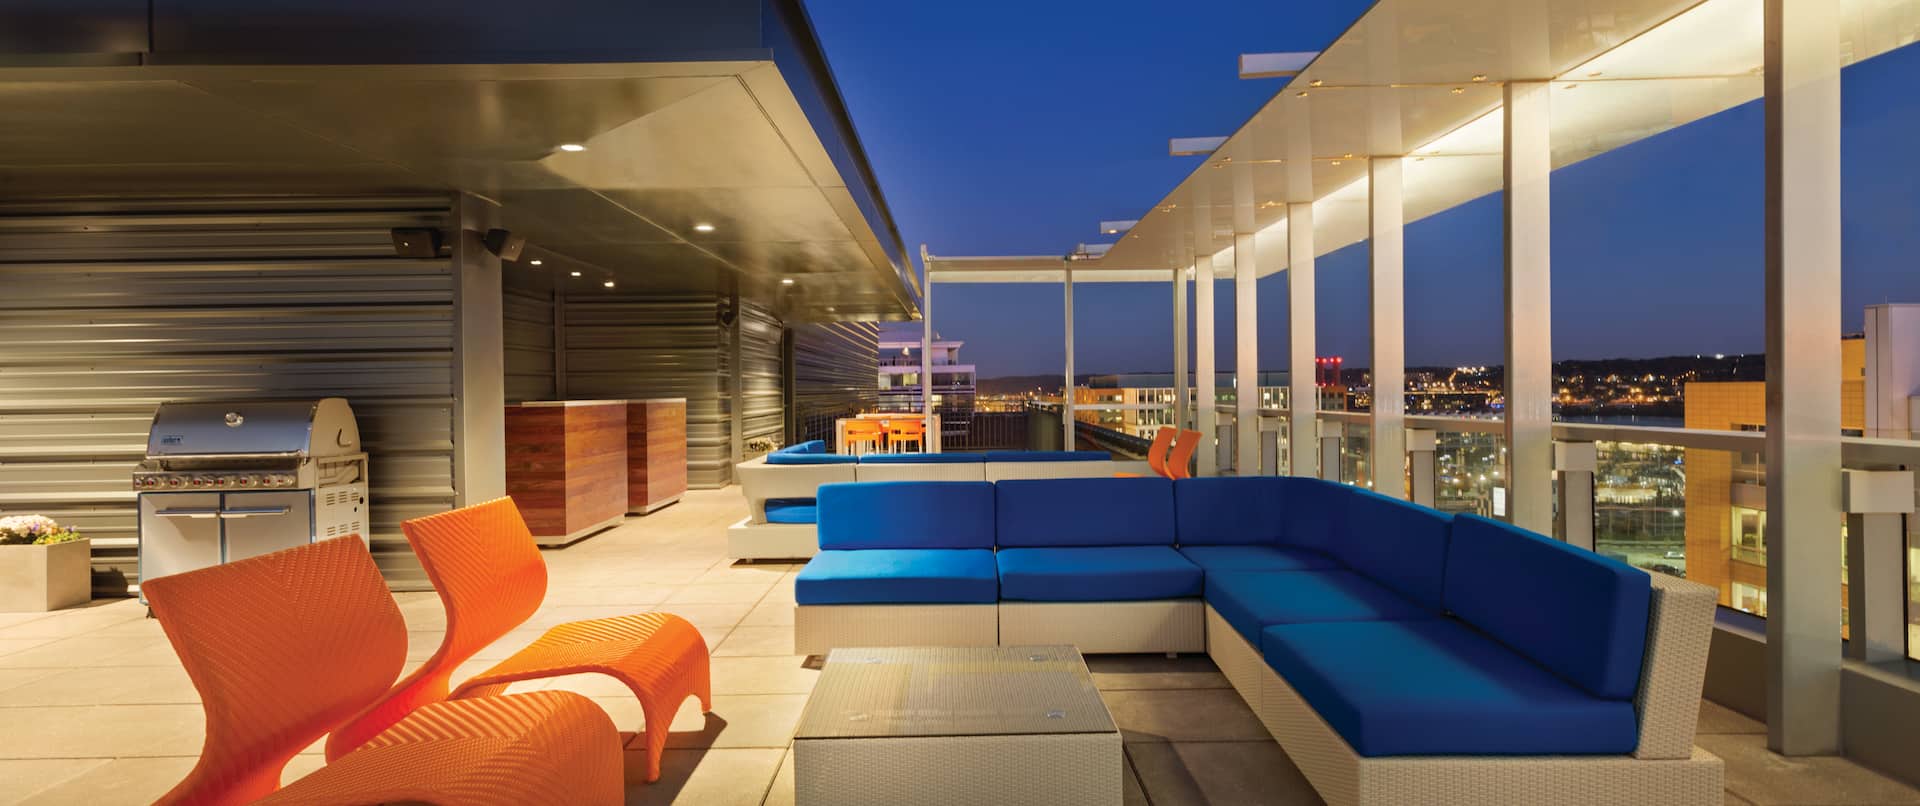 Illuminated Roof Top Terrace With Orange Chairs, Tables, Blue Sofa, and Grill at Night